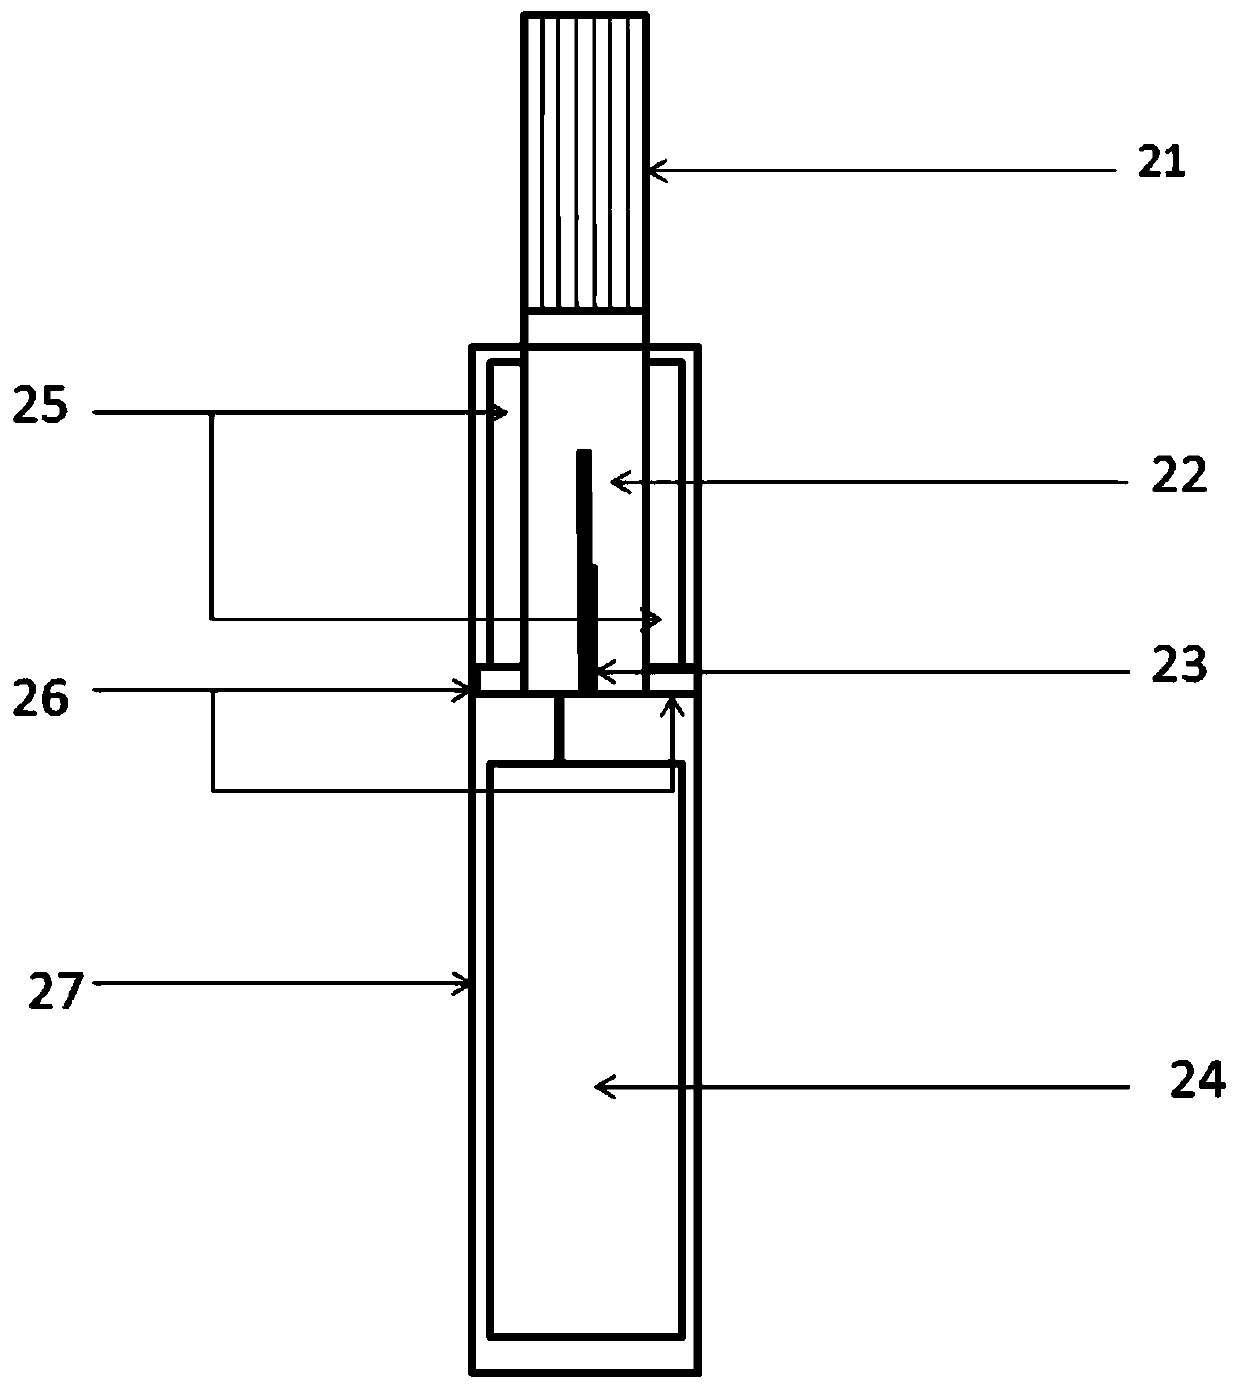 A cigarette filter rod capable of reducing the temperature of mainstream cigarette smoke